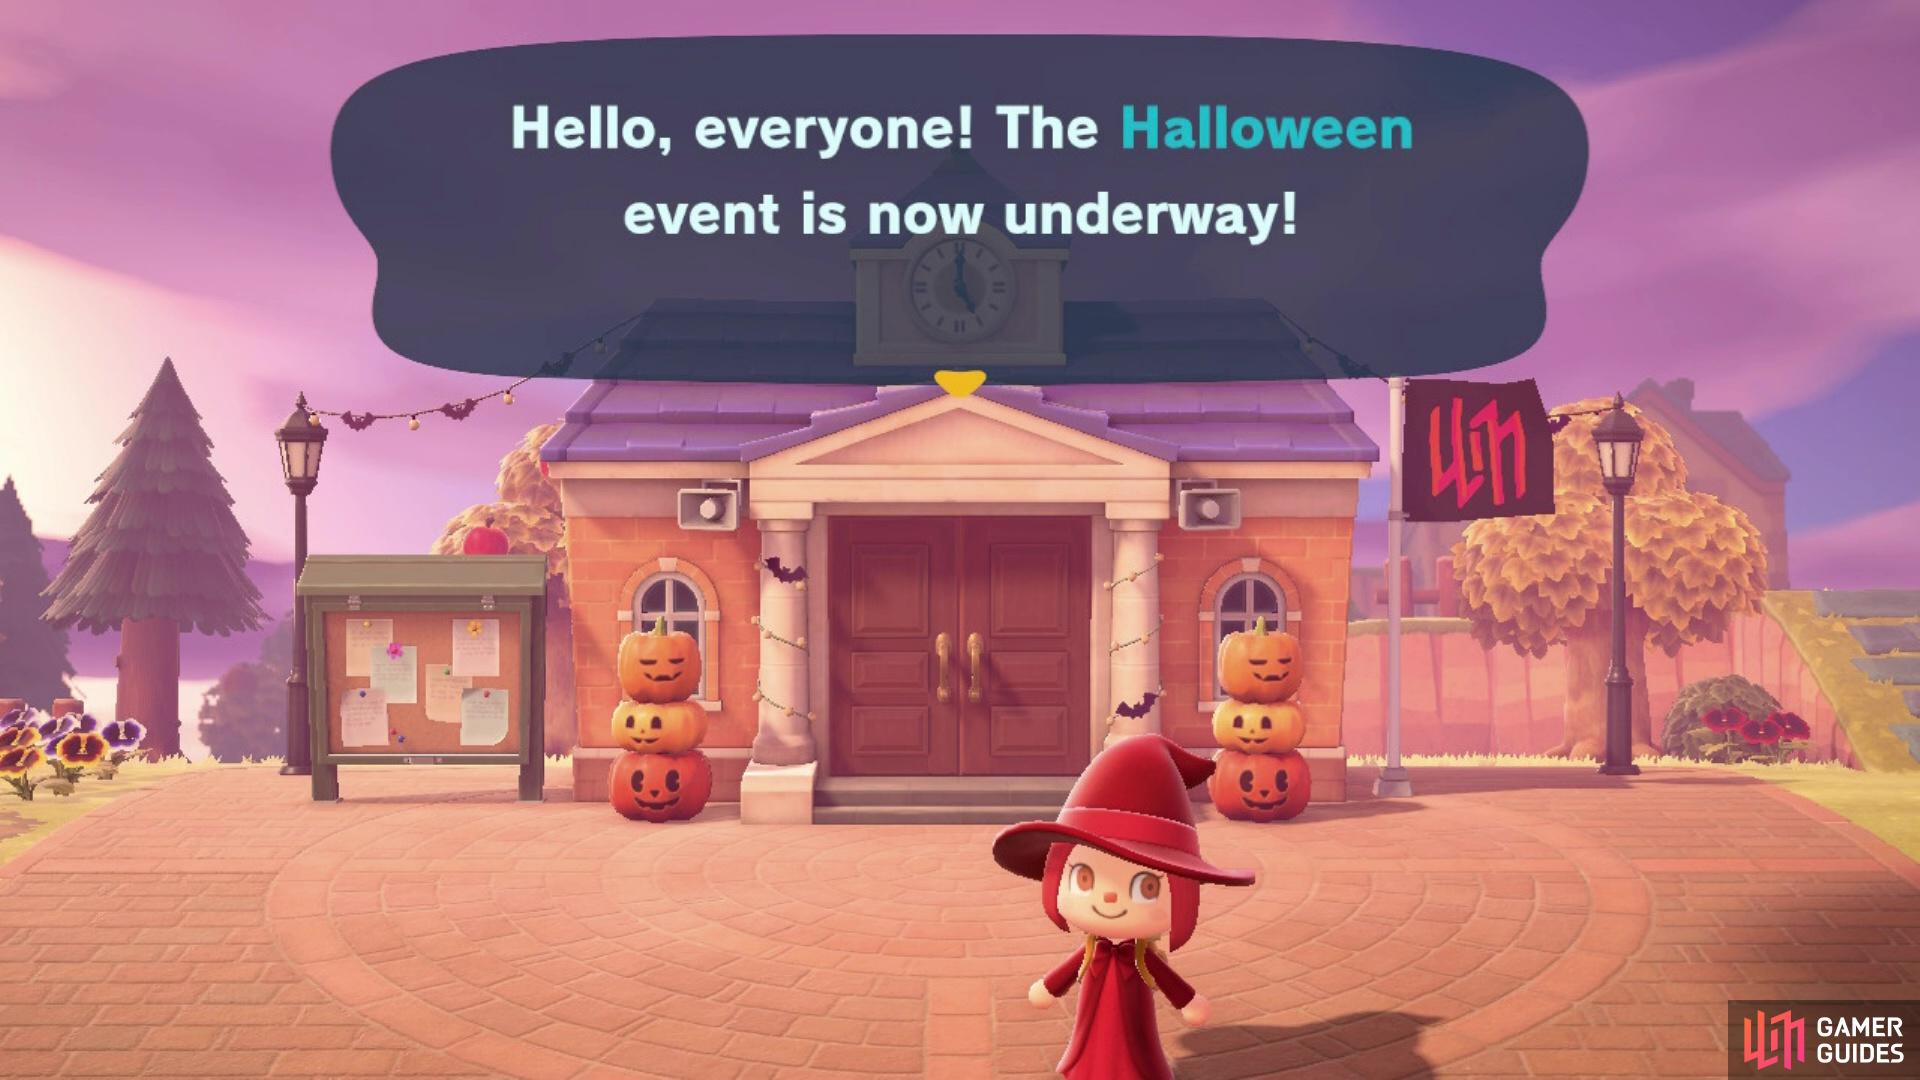 Get your costume and candies at the ready, Halloween starts at 5pm on the 31st of October.